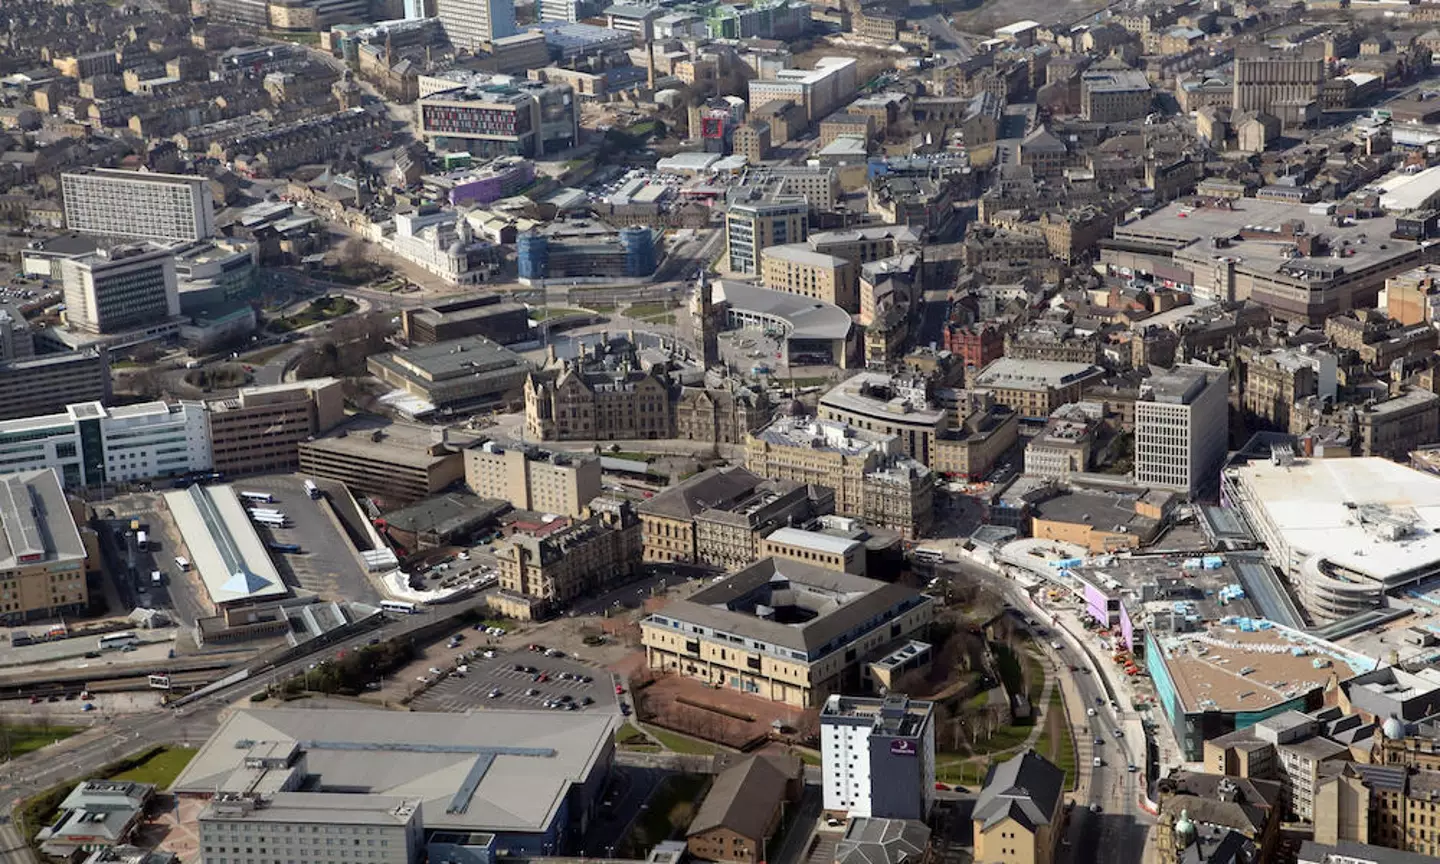 Bradford was named the most dangerous city in Europe.